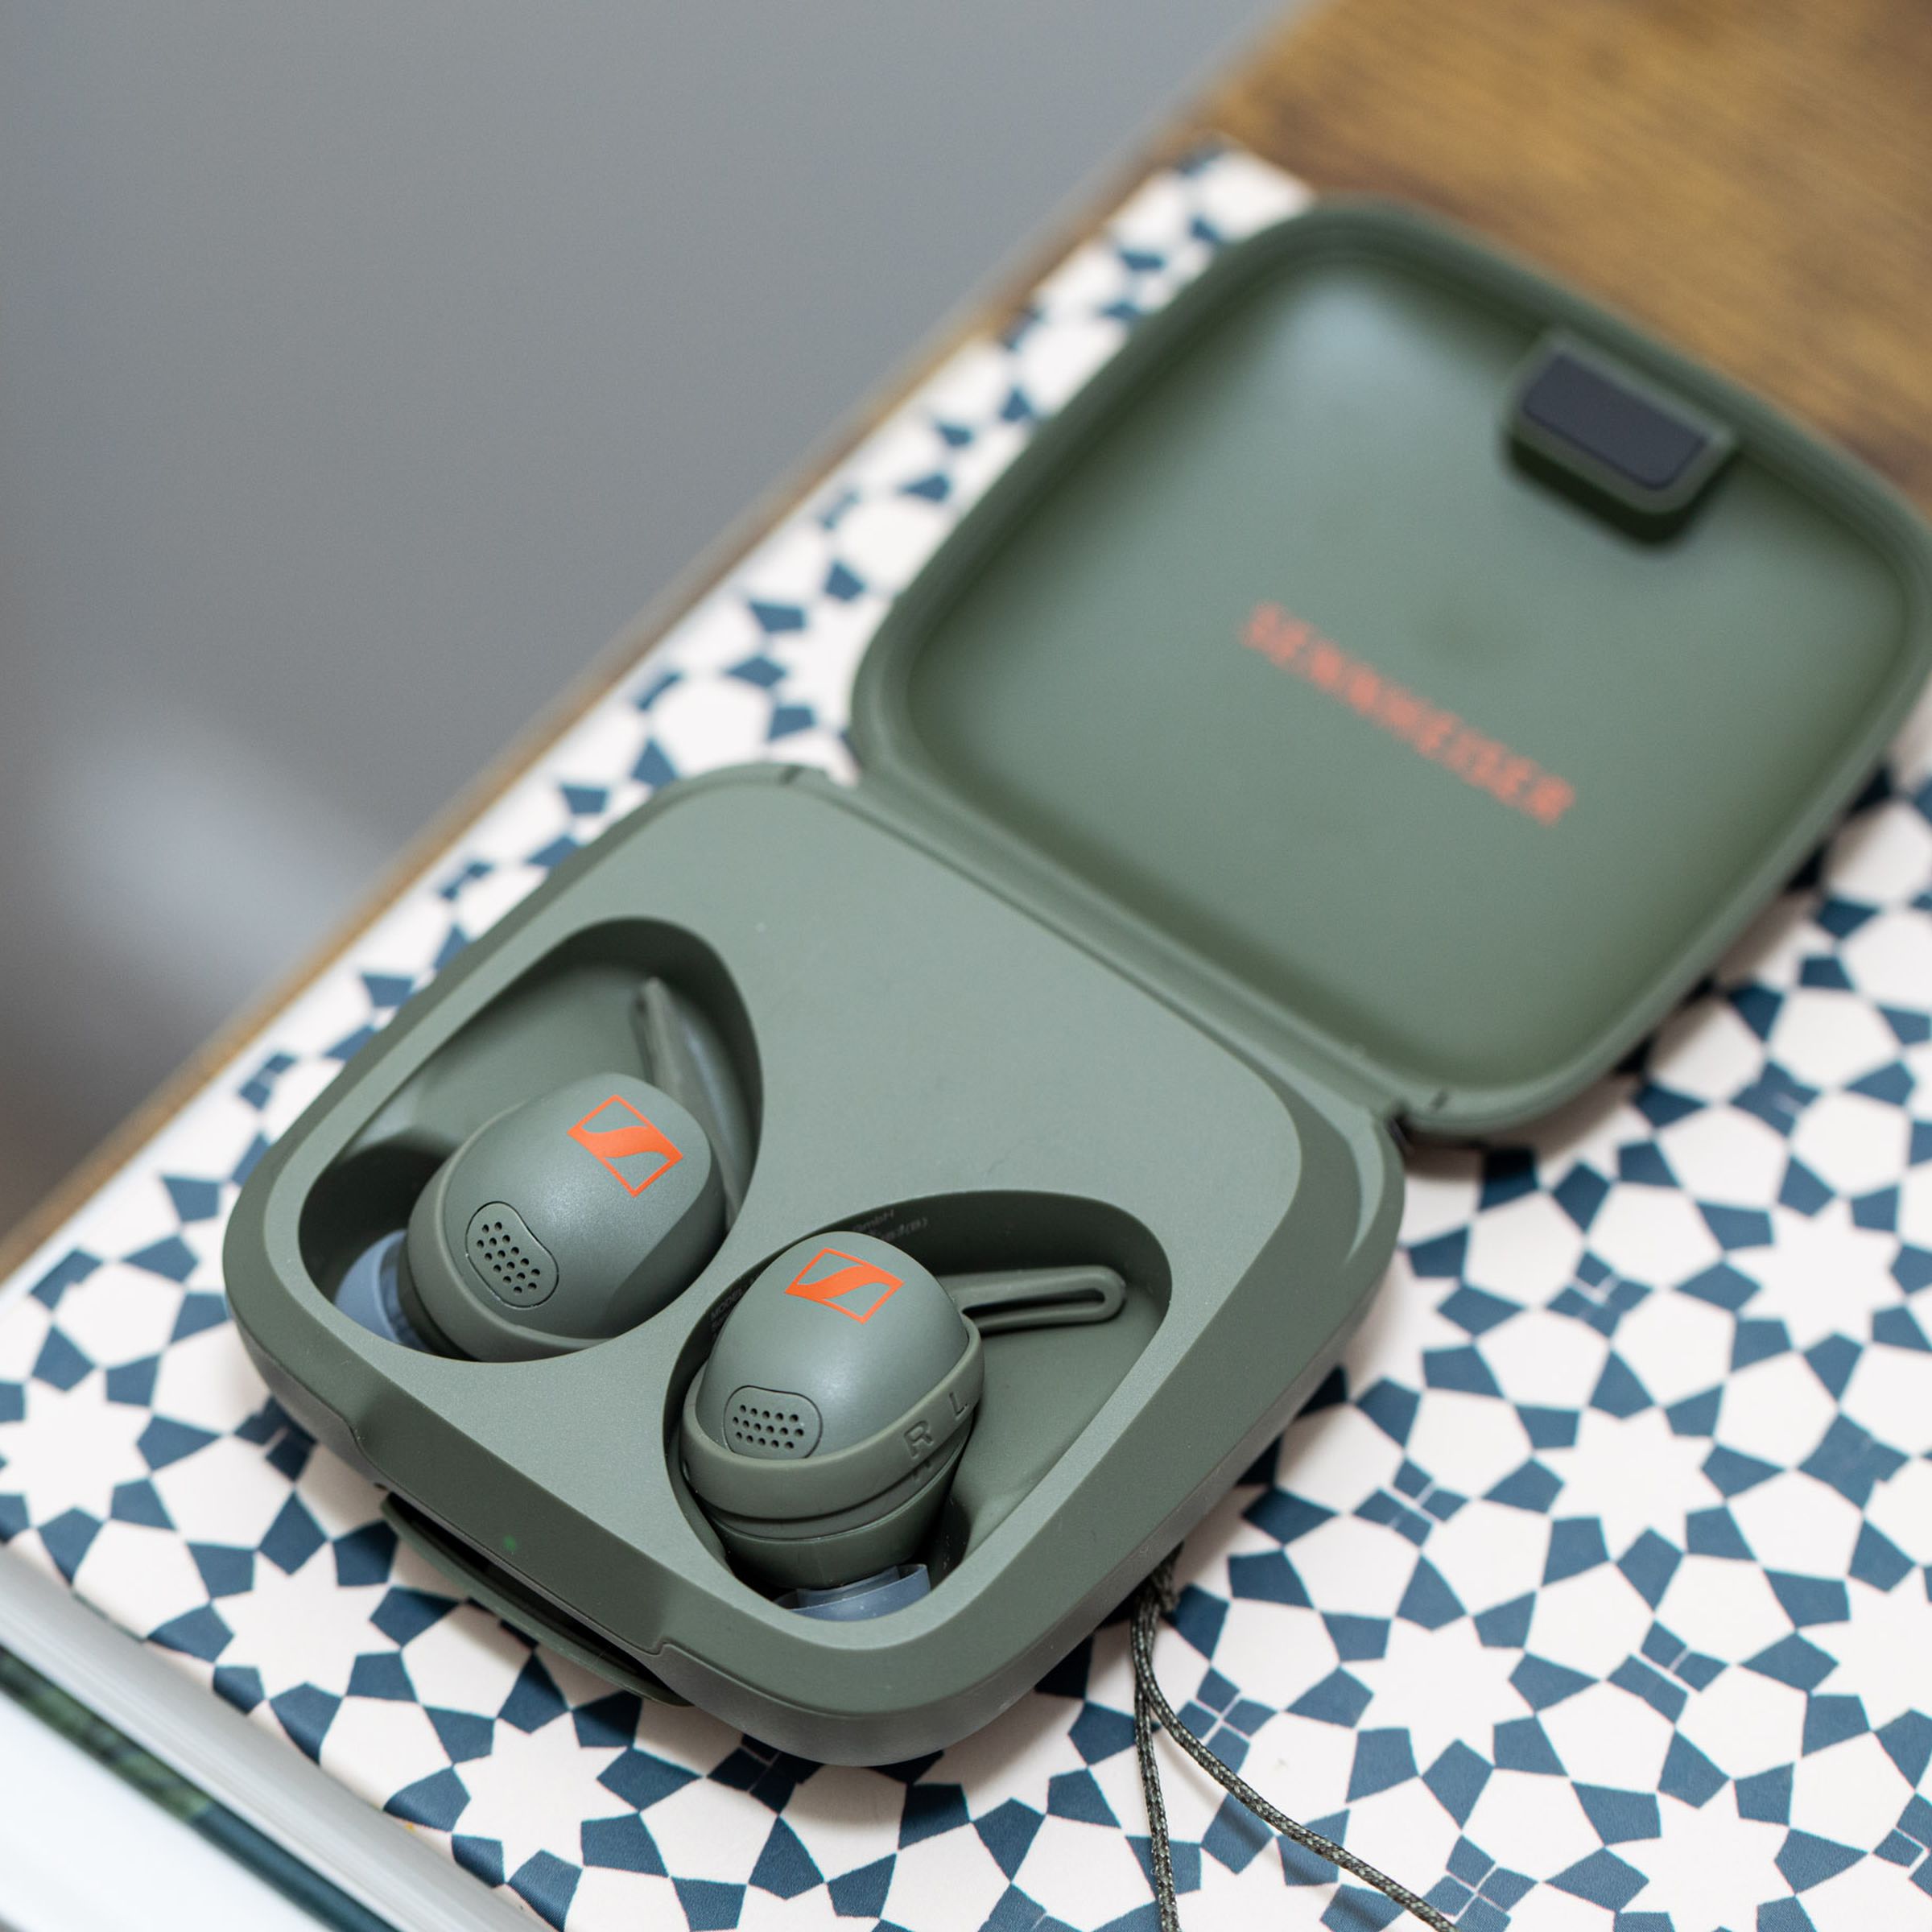 Olive-colored Sennheiser Momentum Sport buds in their case on top of a patterned book.